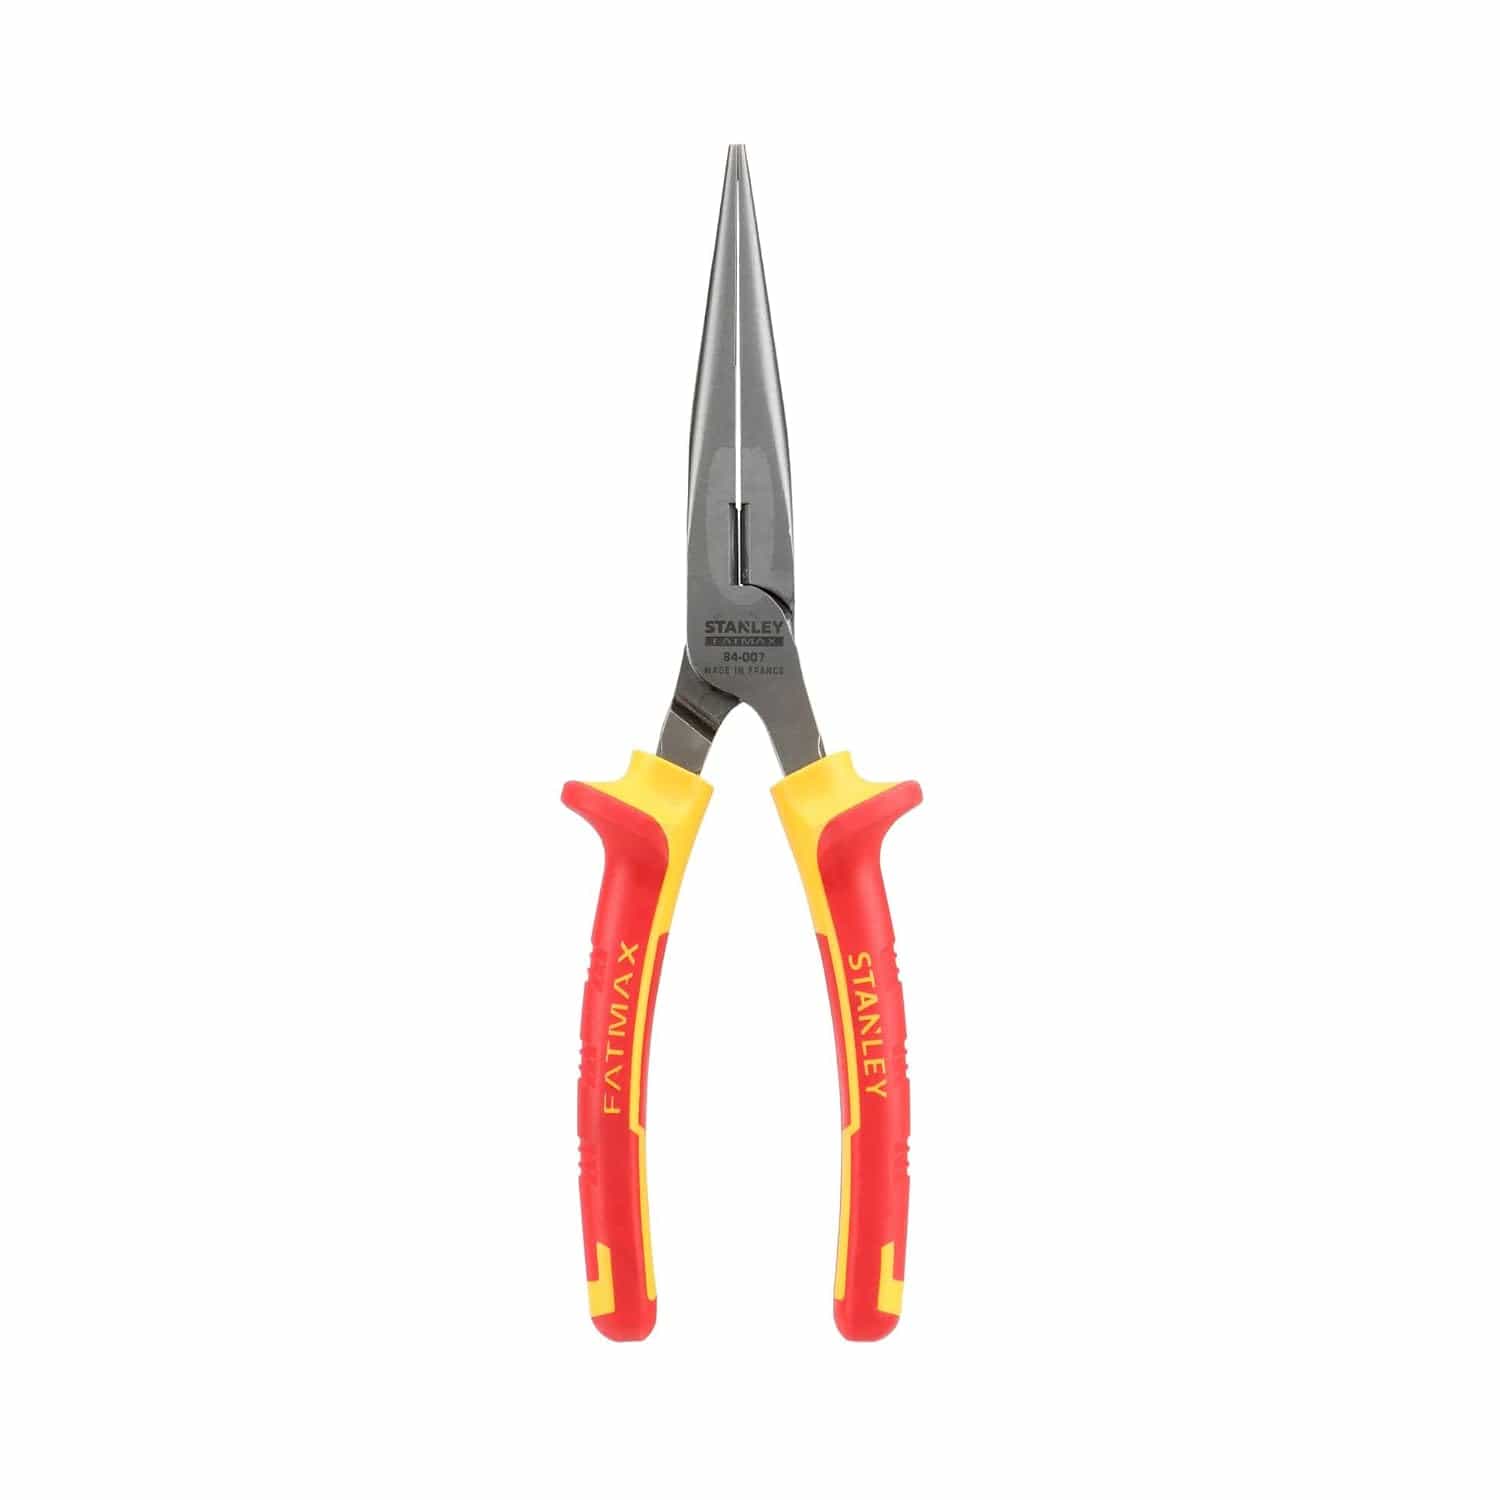 Total Insulated Long Nose Plier - THTIP381 in Accra, Ghana - Supply Master Pliers Buy Tools hardware Building materials